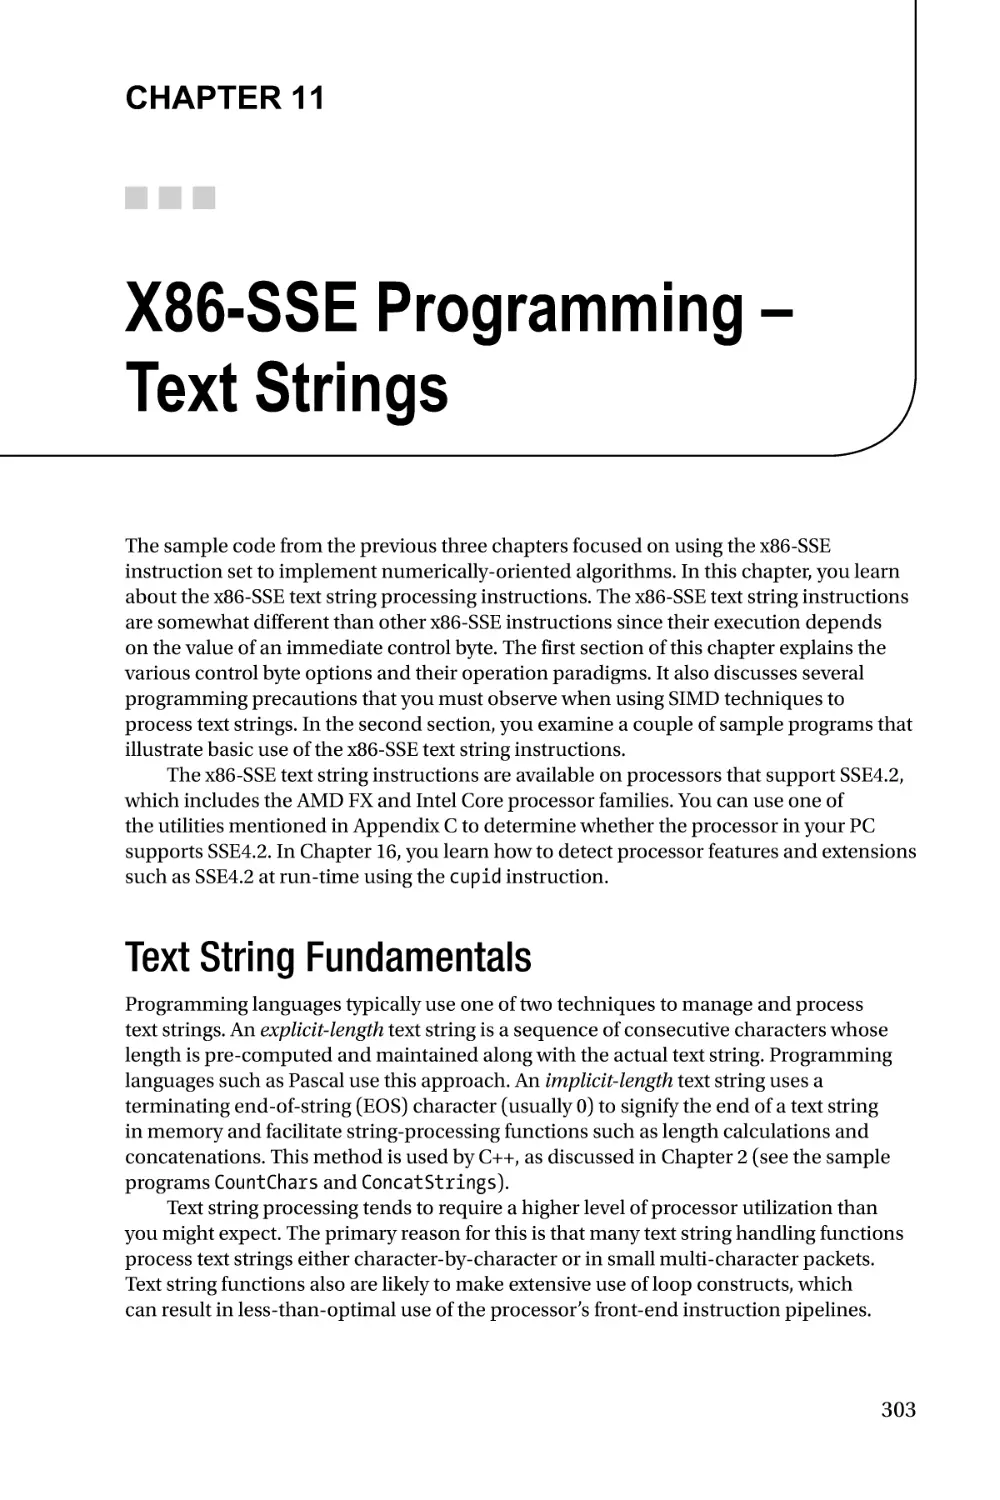 Chapter 11
Text String Fundamentals